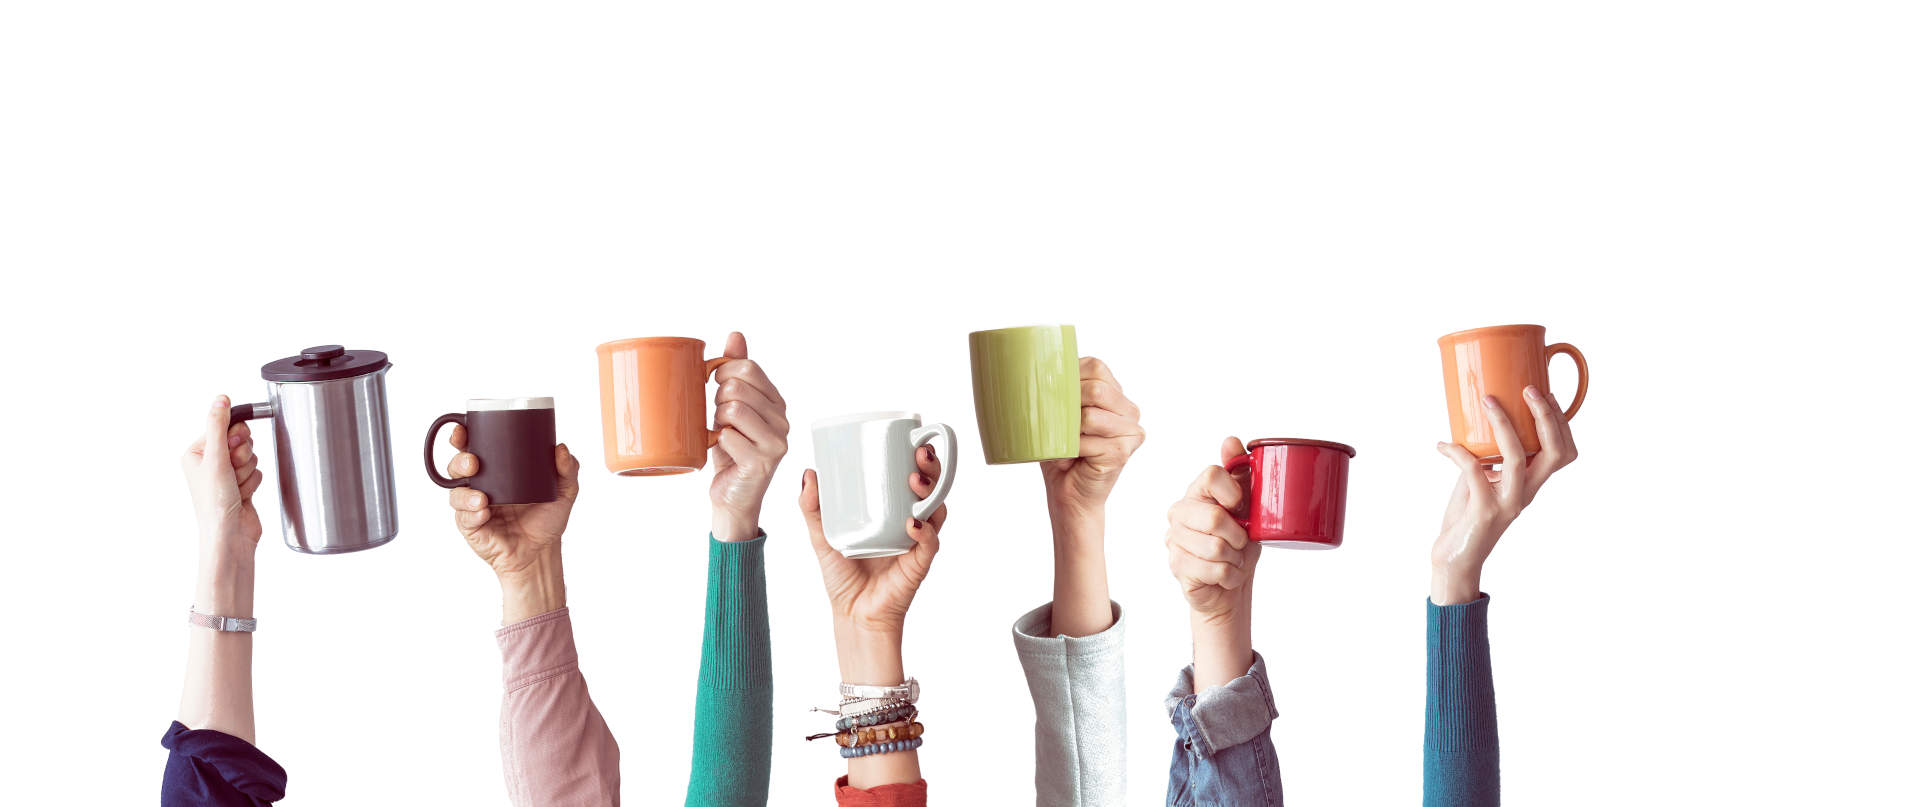 Arms raised with different coffee cups